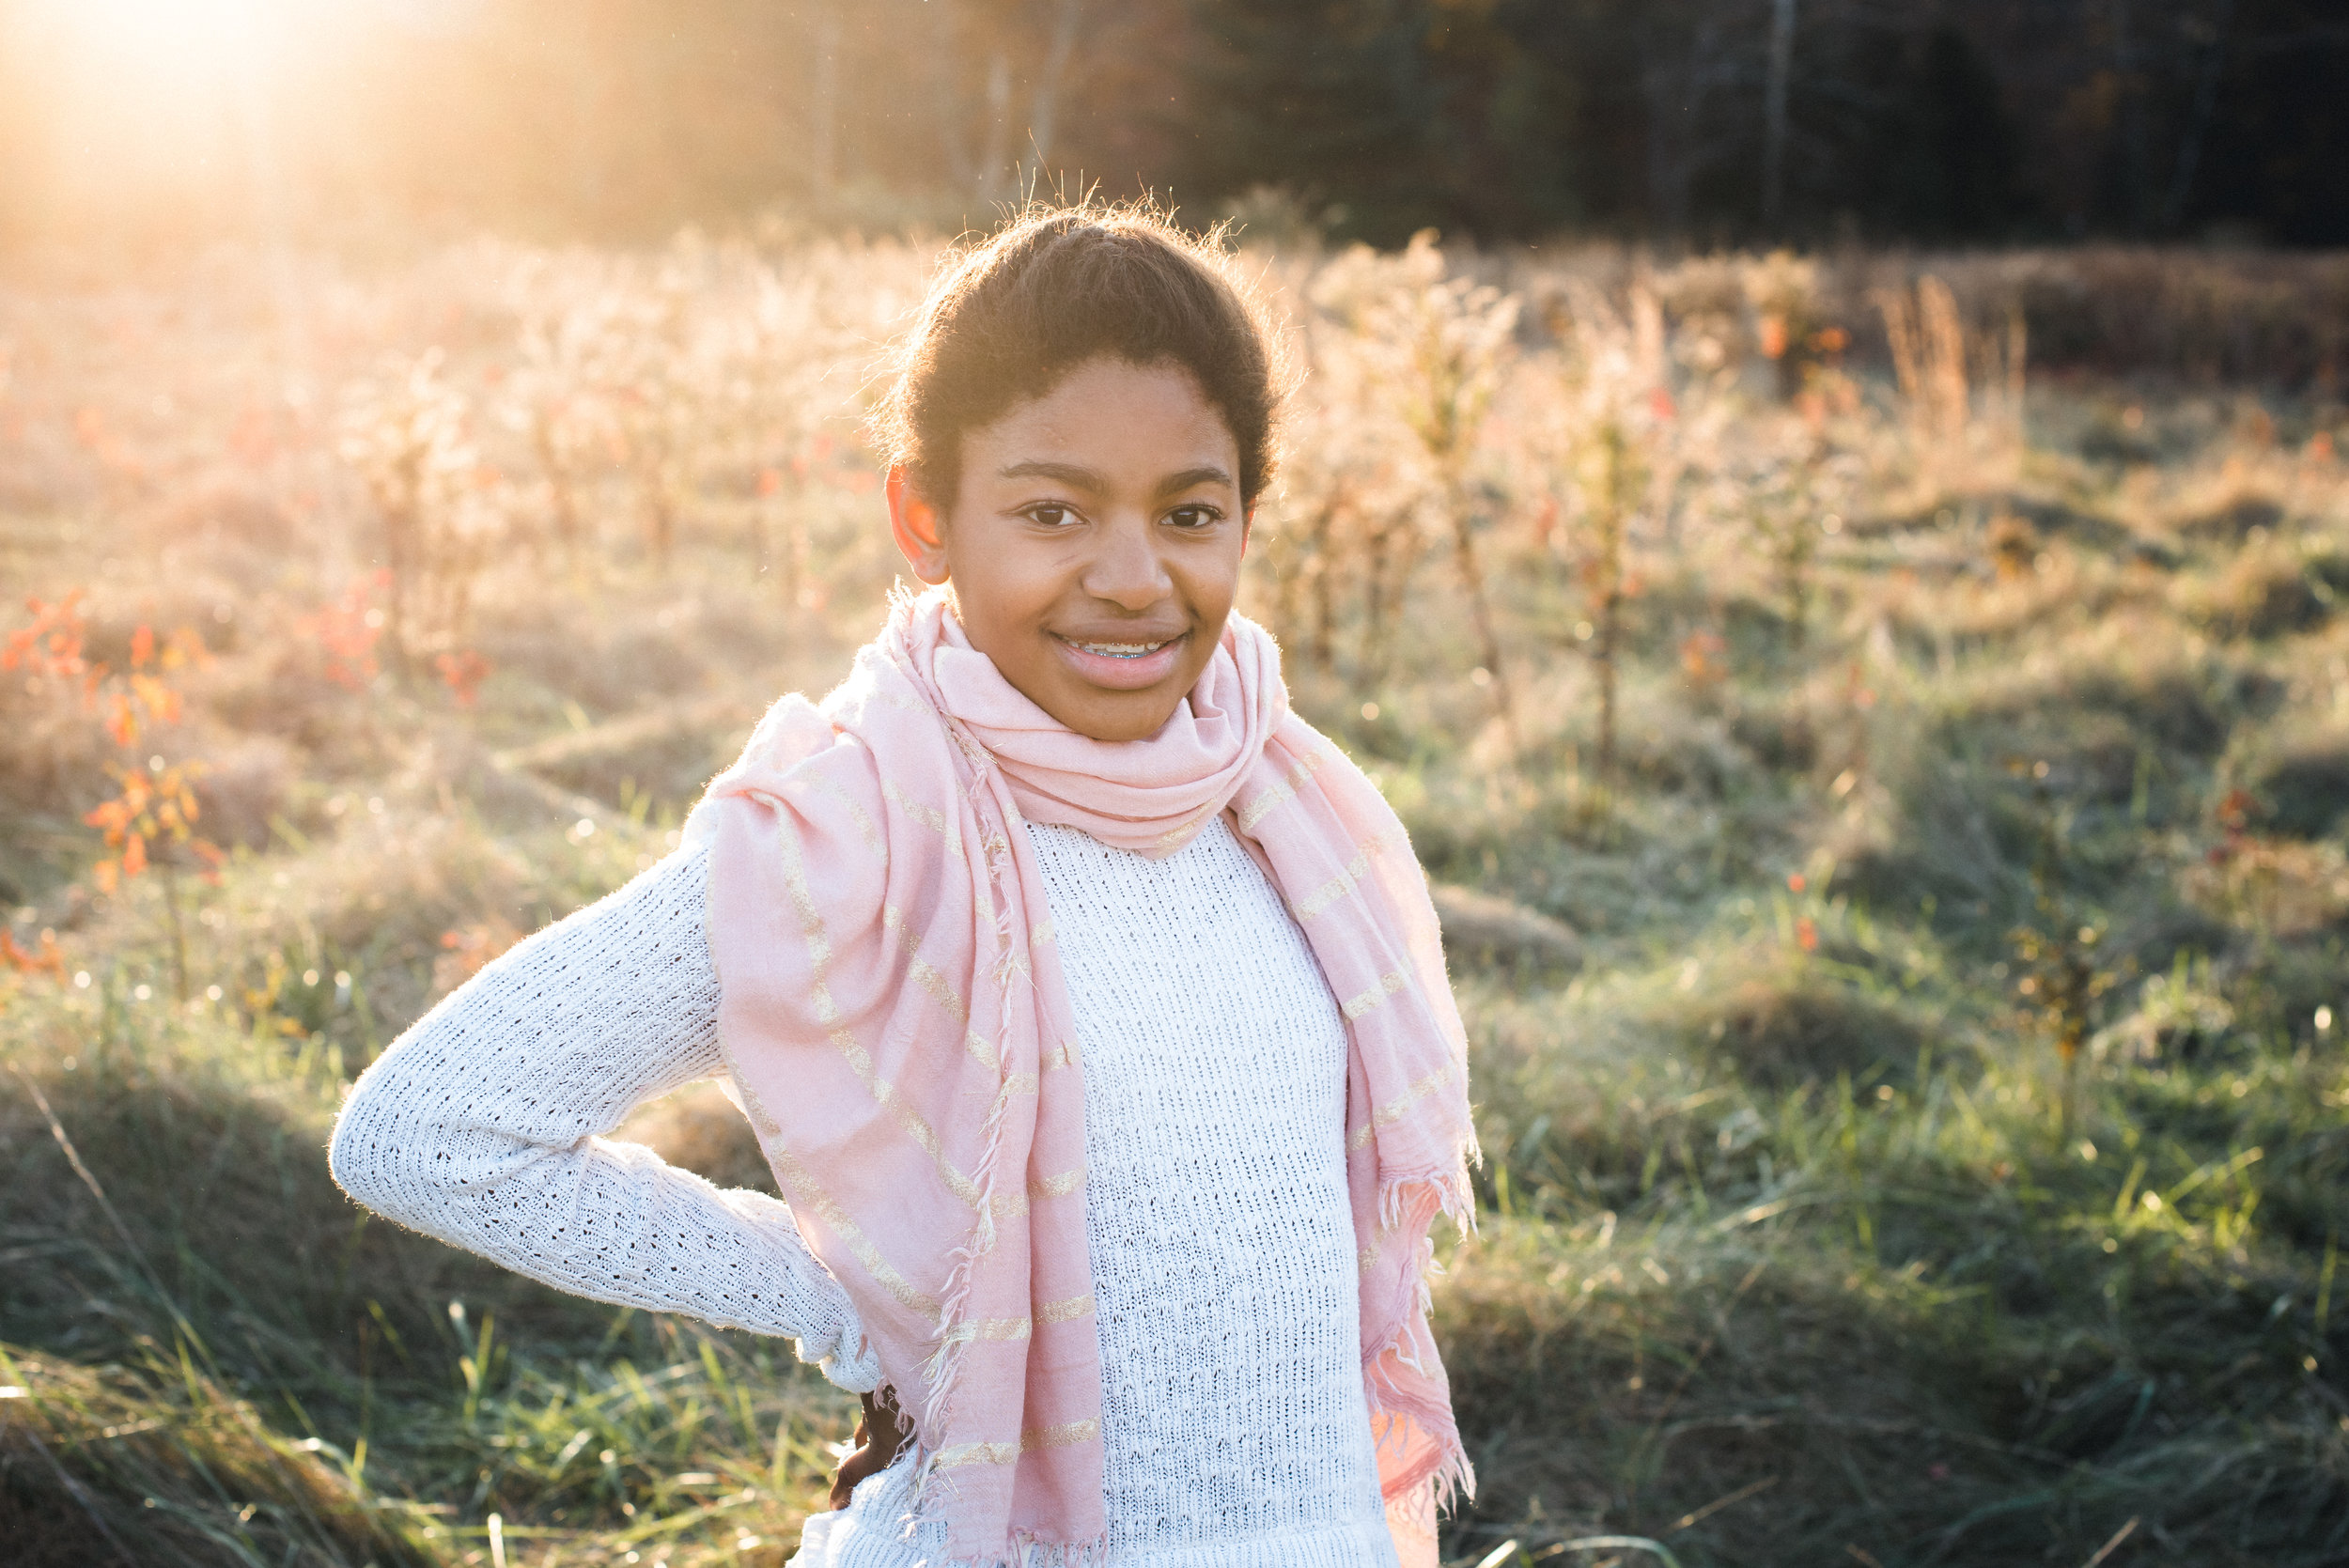 teenager with natural smile in a field at sunset